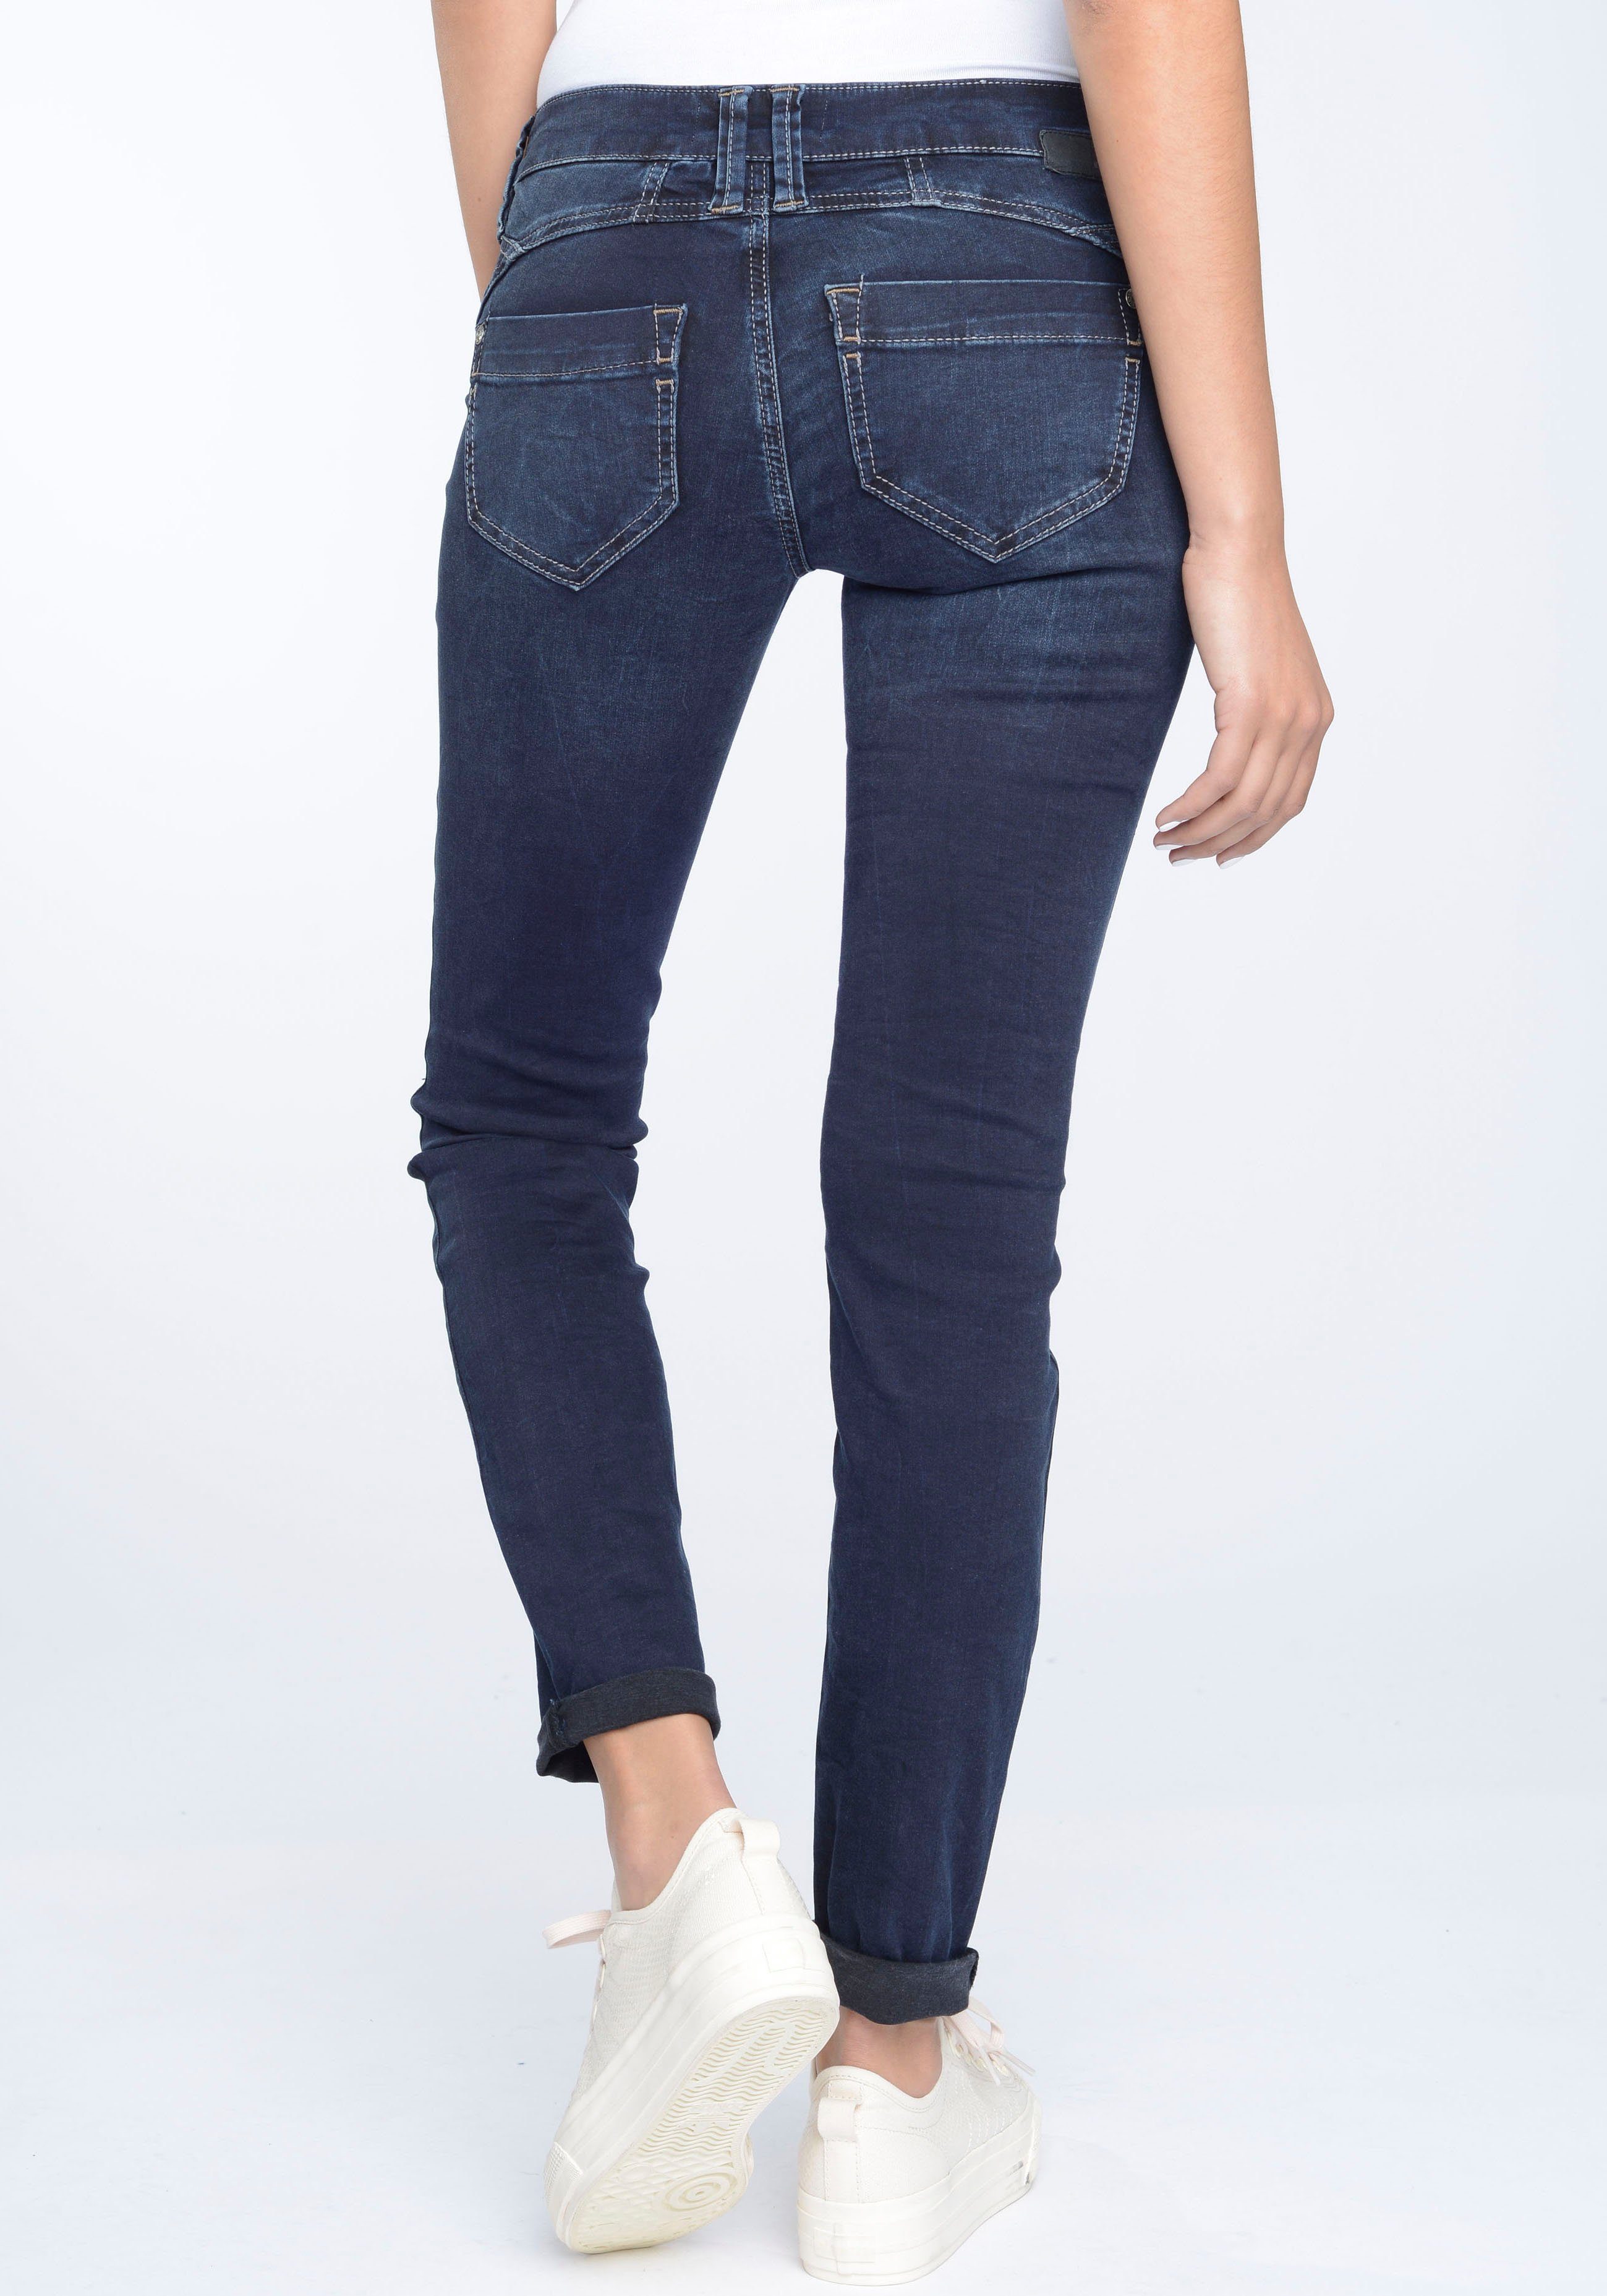 GANG Skinny-fit-Jeans 94Nena in authenischer Used-Waschung dark used